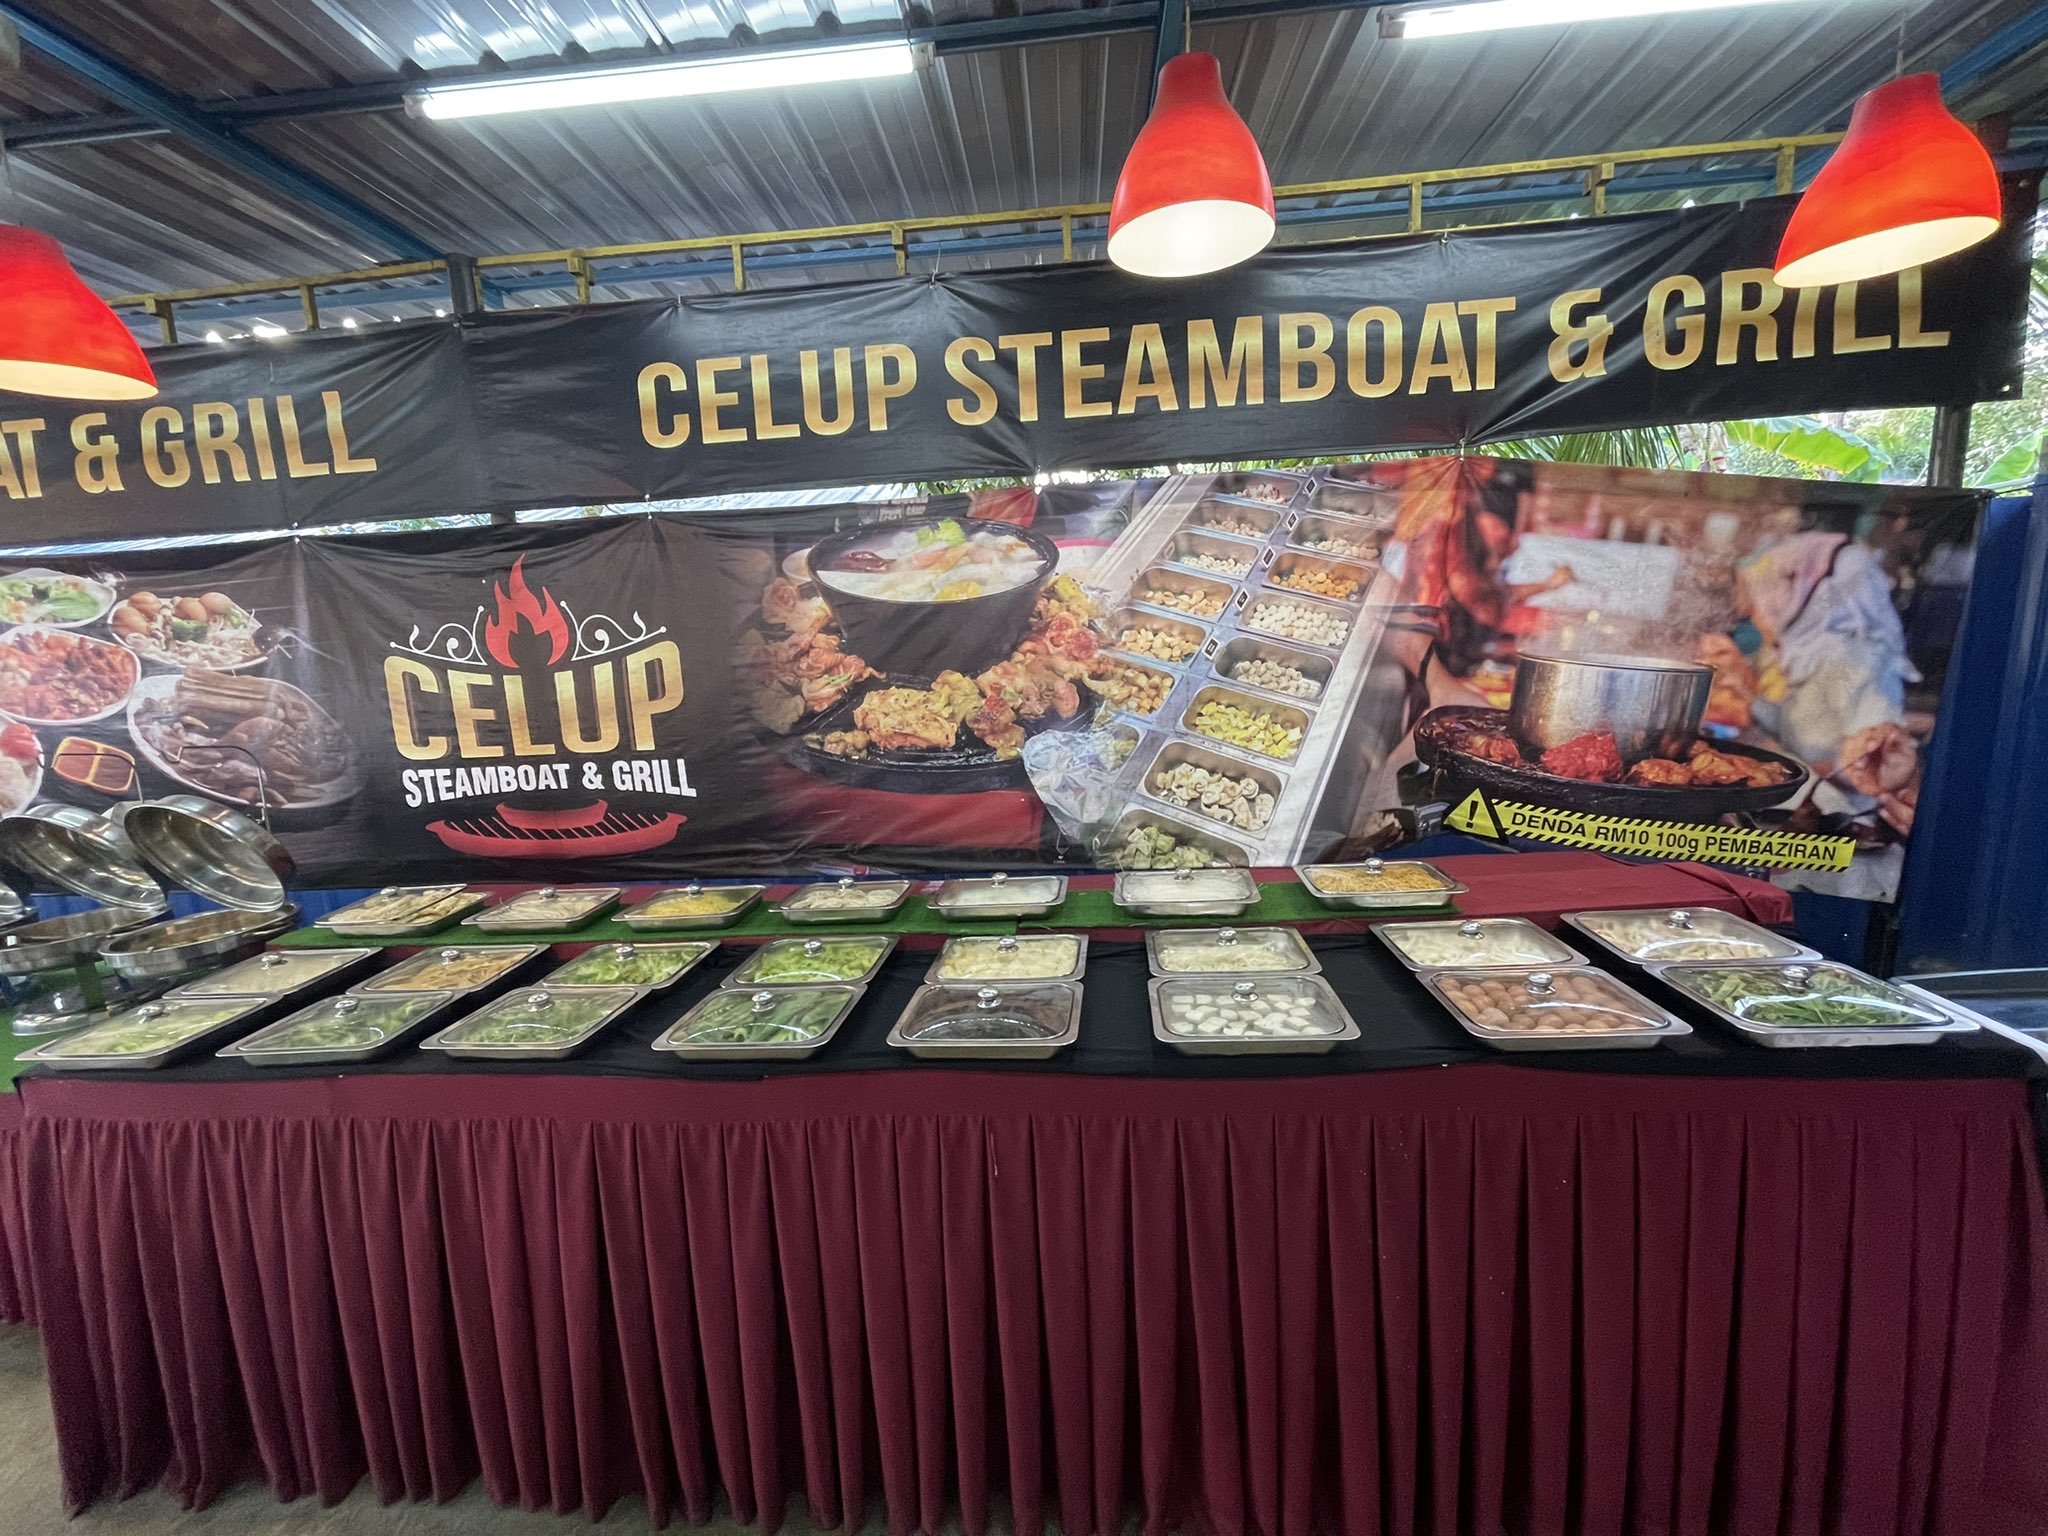 Steamboat celup